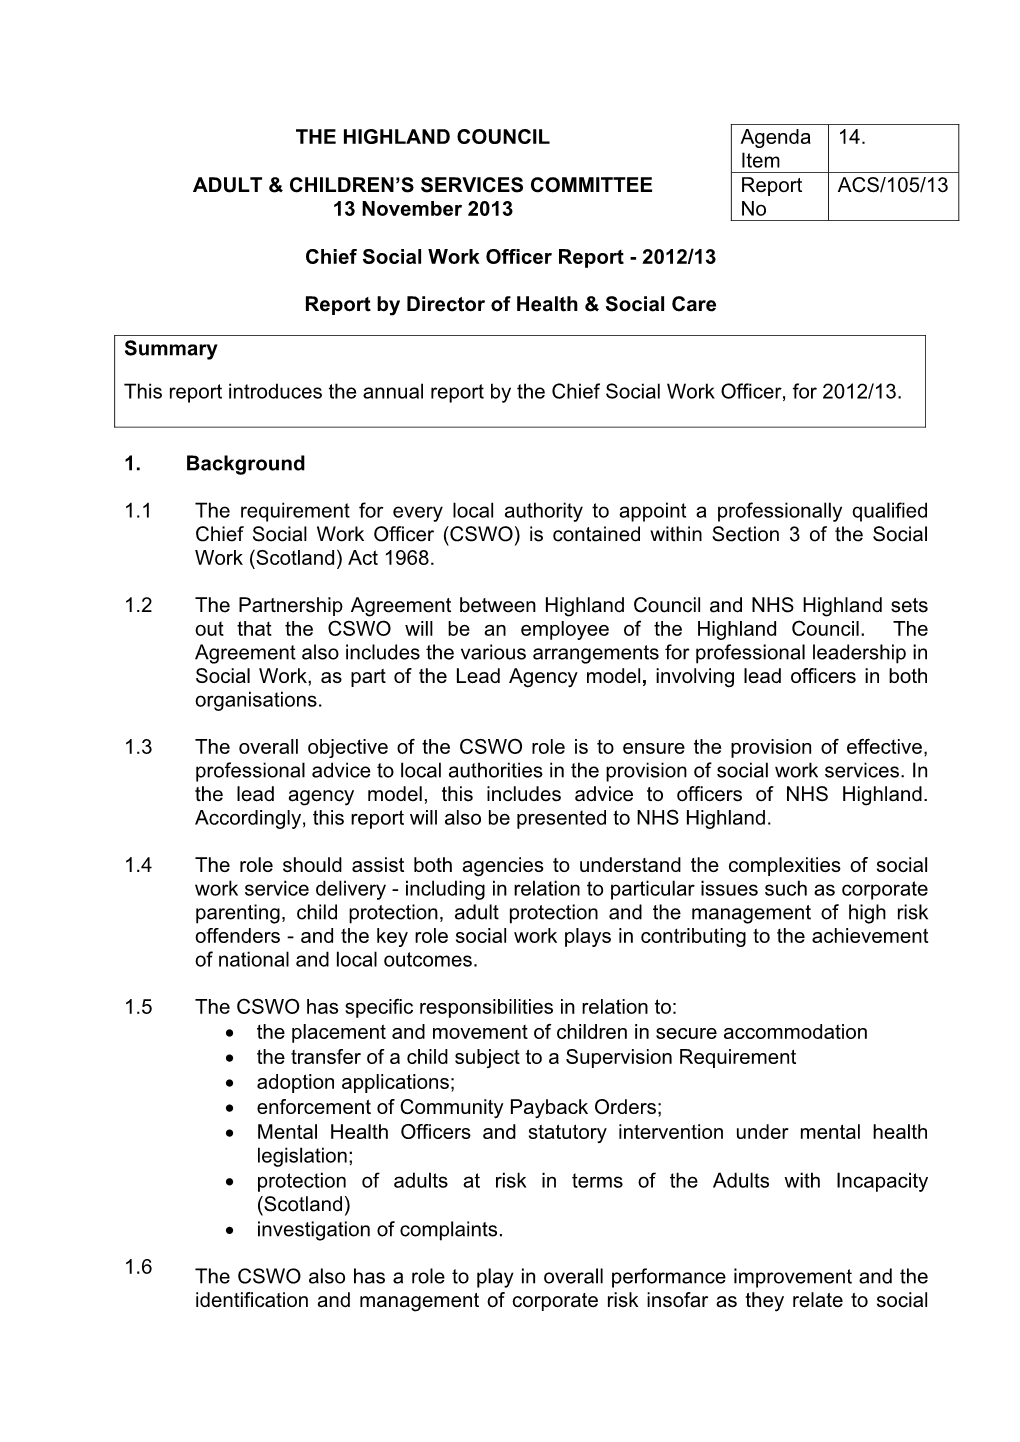 Chief Social Work Officer Report - 2012/13